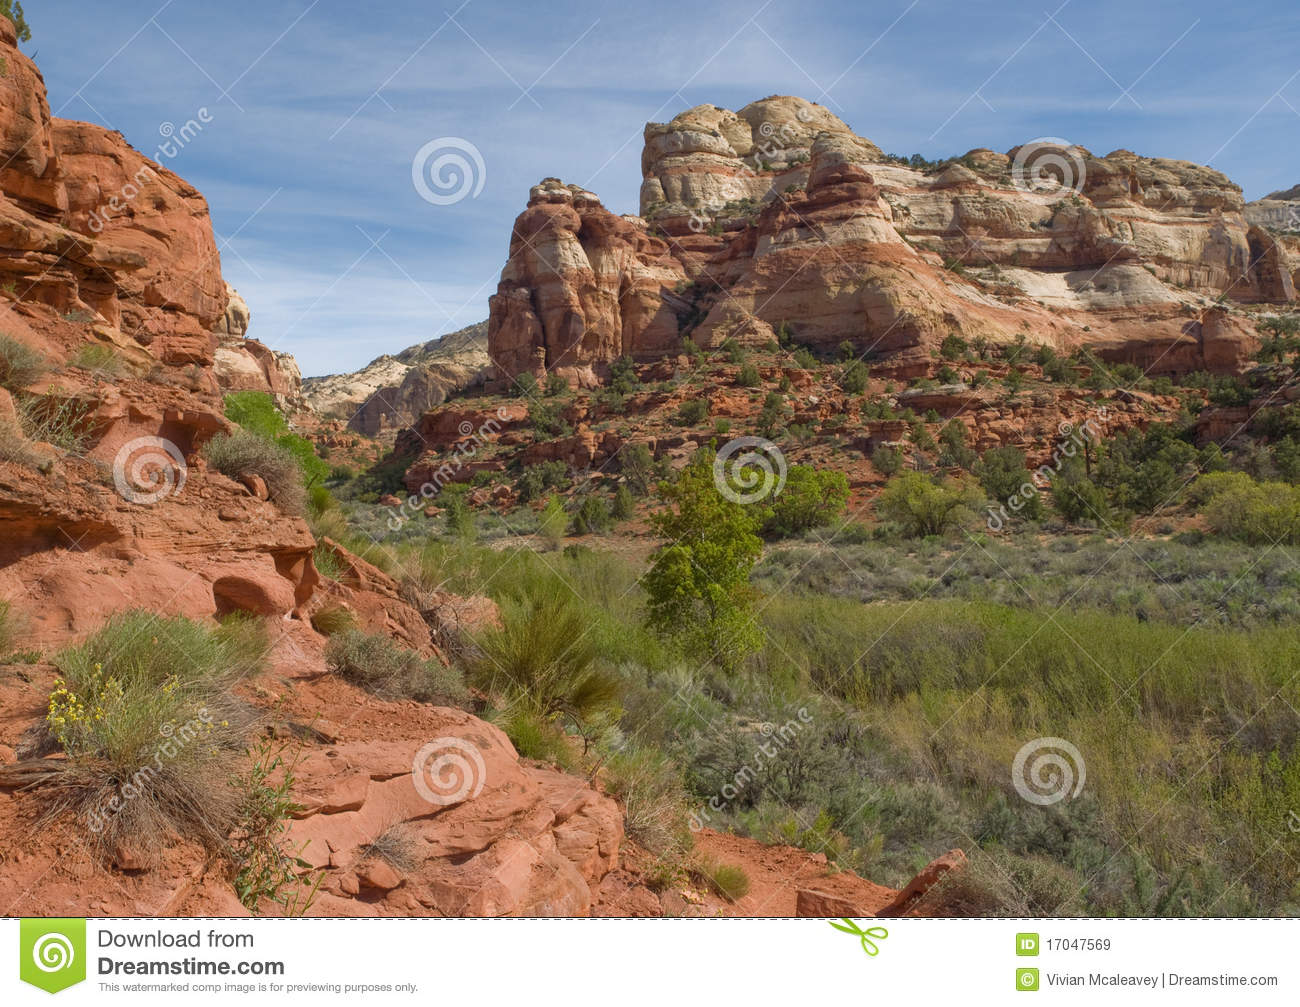 Lush River Valley In Red Sandstone Desert Canyon Royalty Free Stock